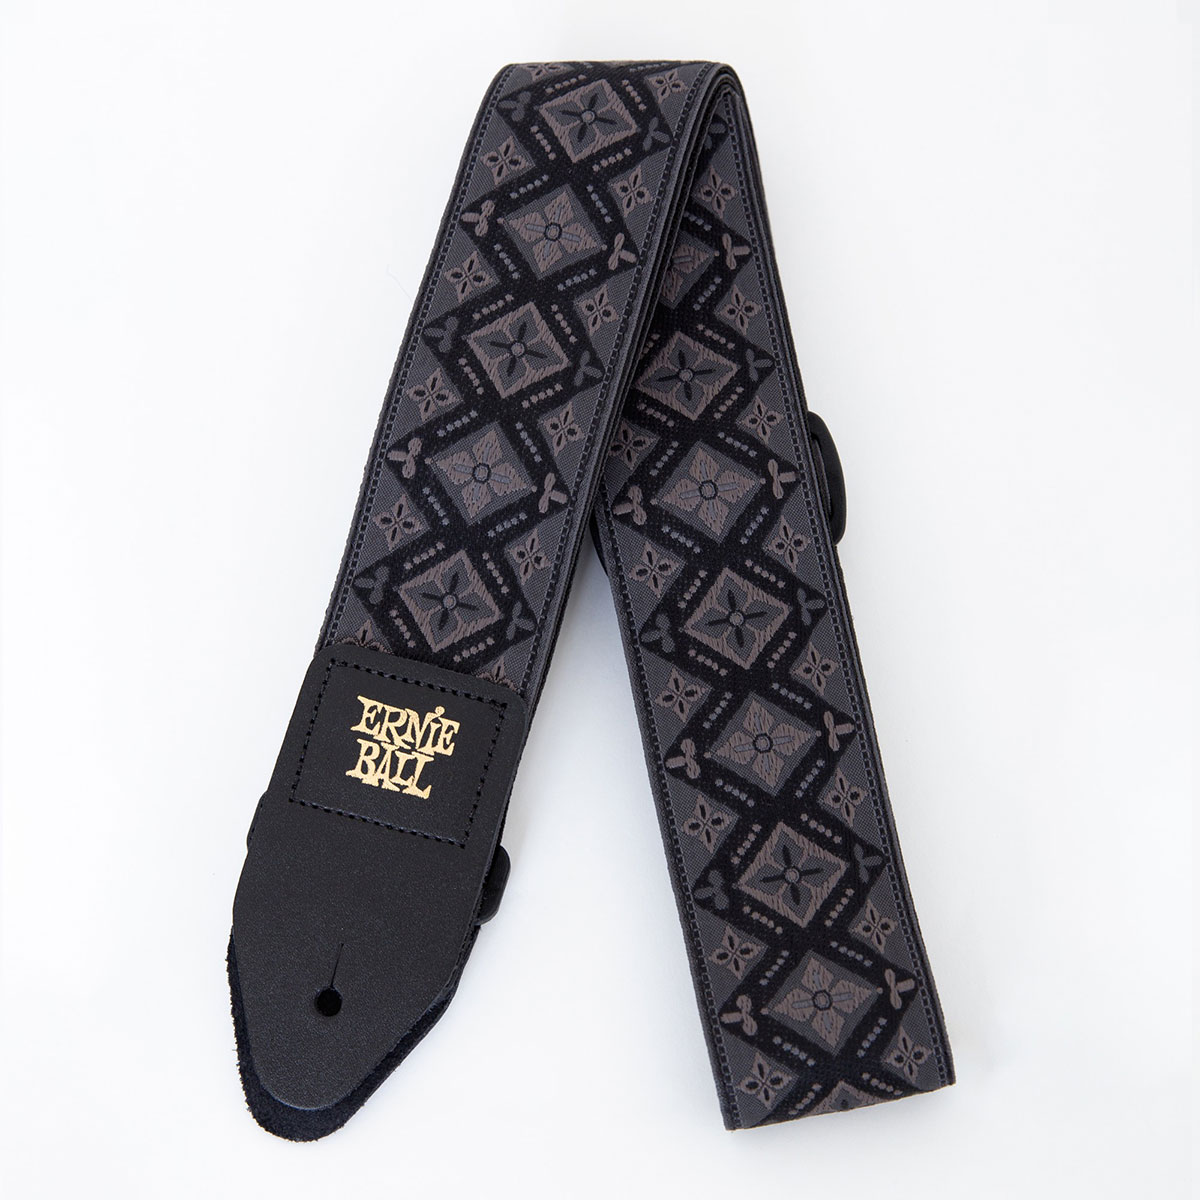 An image of Ernie Ball Classic Jacquard Strap Regal Black - Gift for a Guitarist | PMT Onlin...